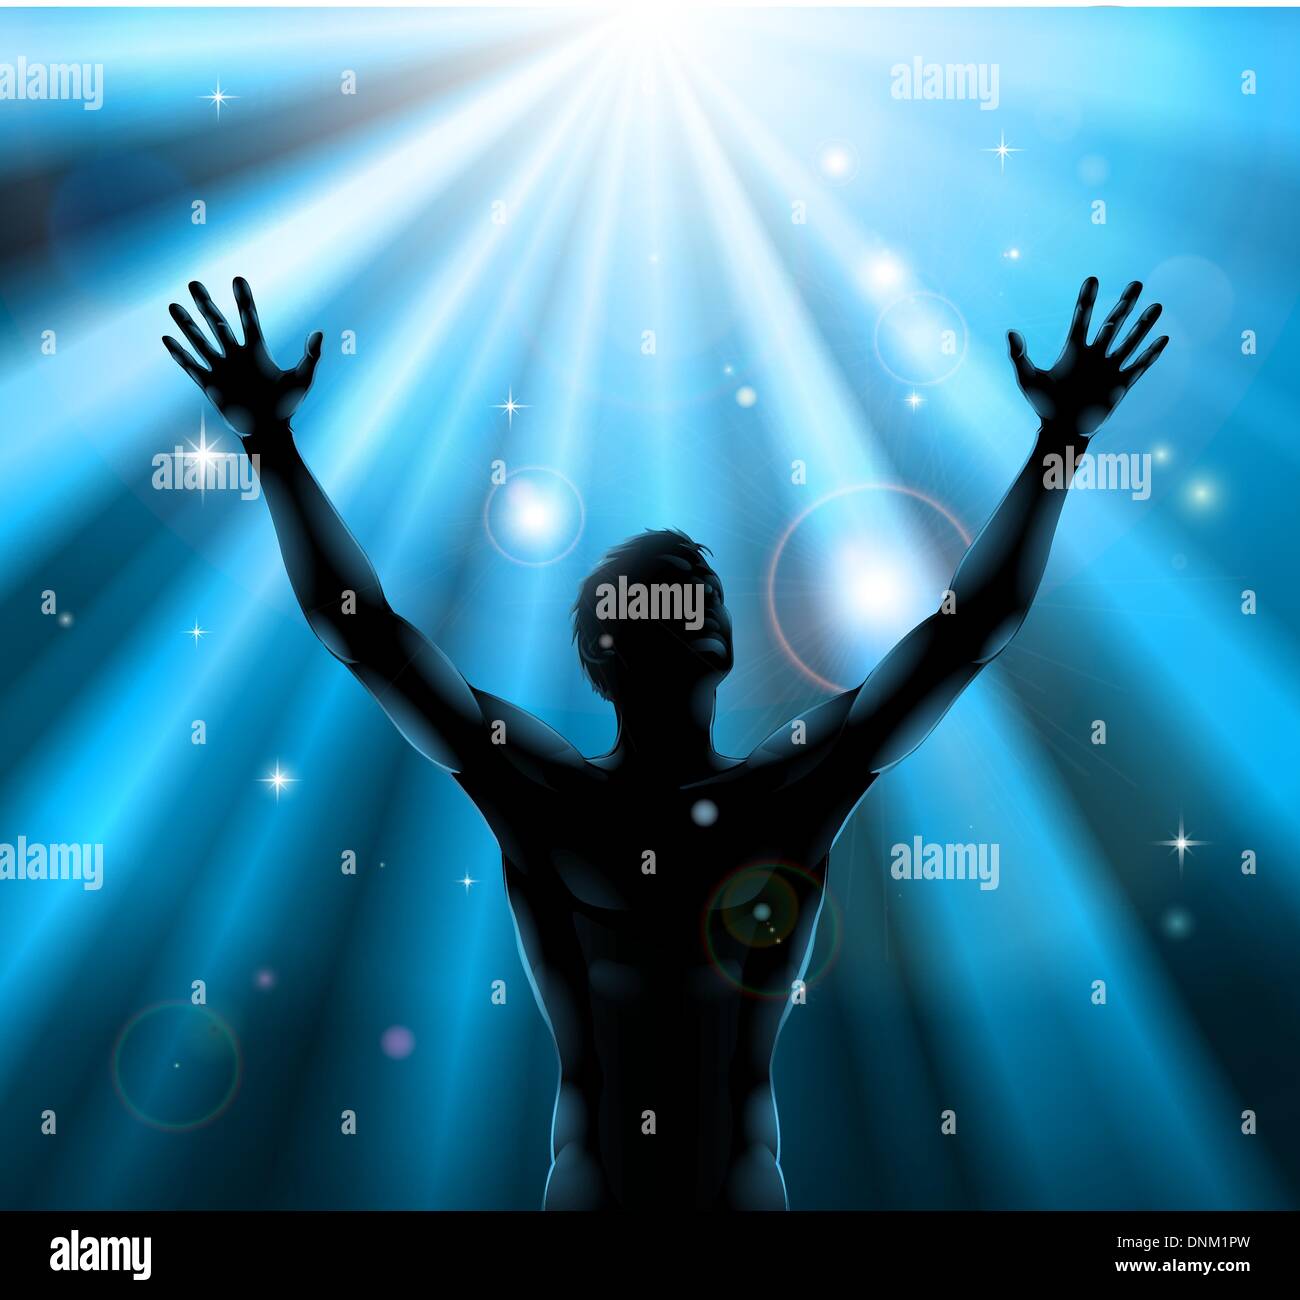 A man with hands held up in silhouette with light rays in the background Stock Vector